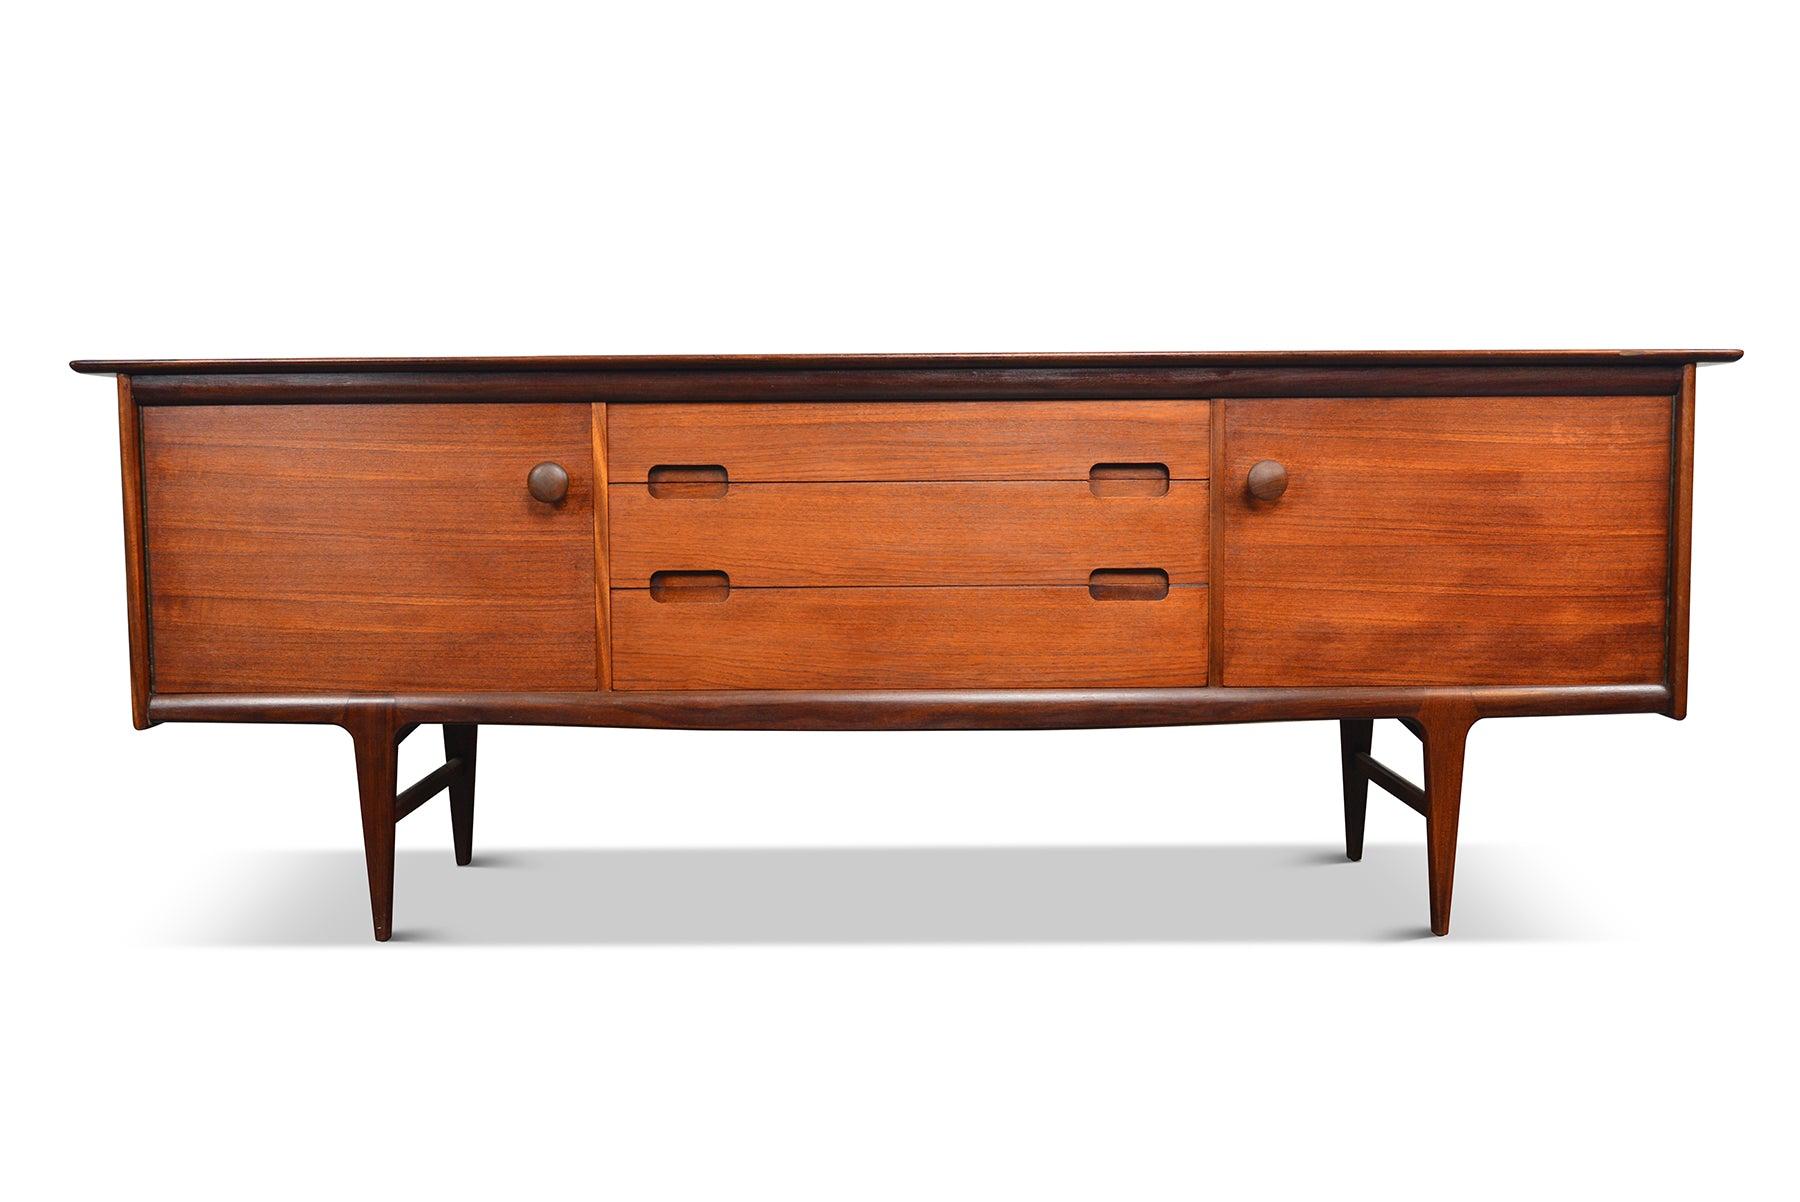 Large Teak Credenza by a. Younger Ltd #2 4